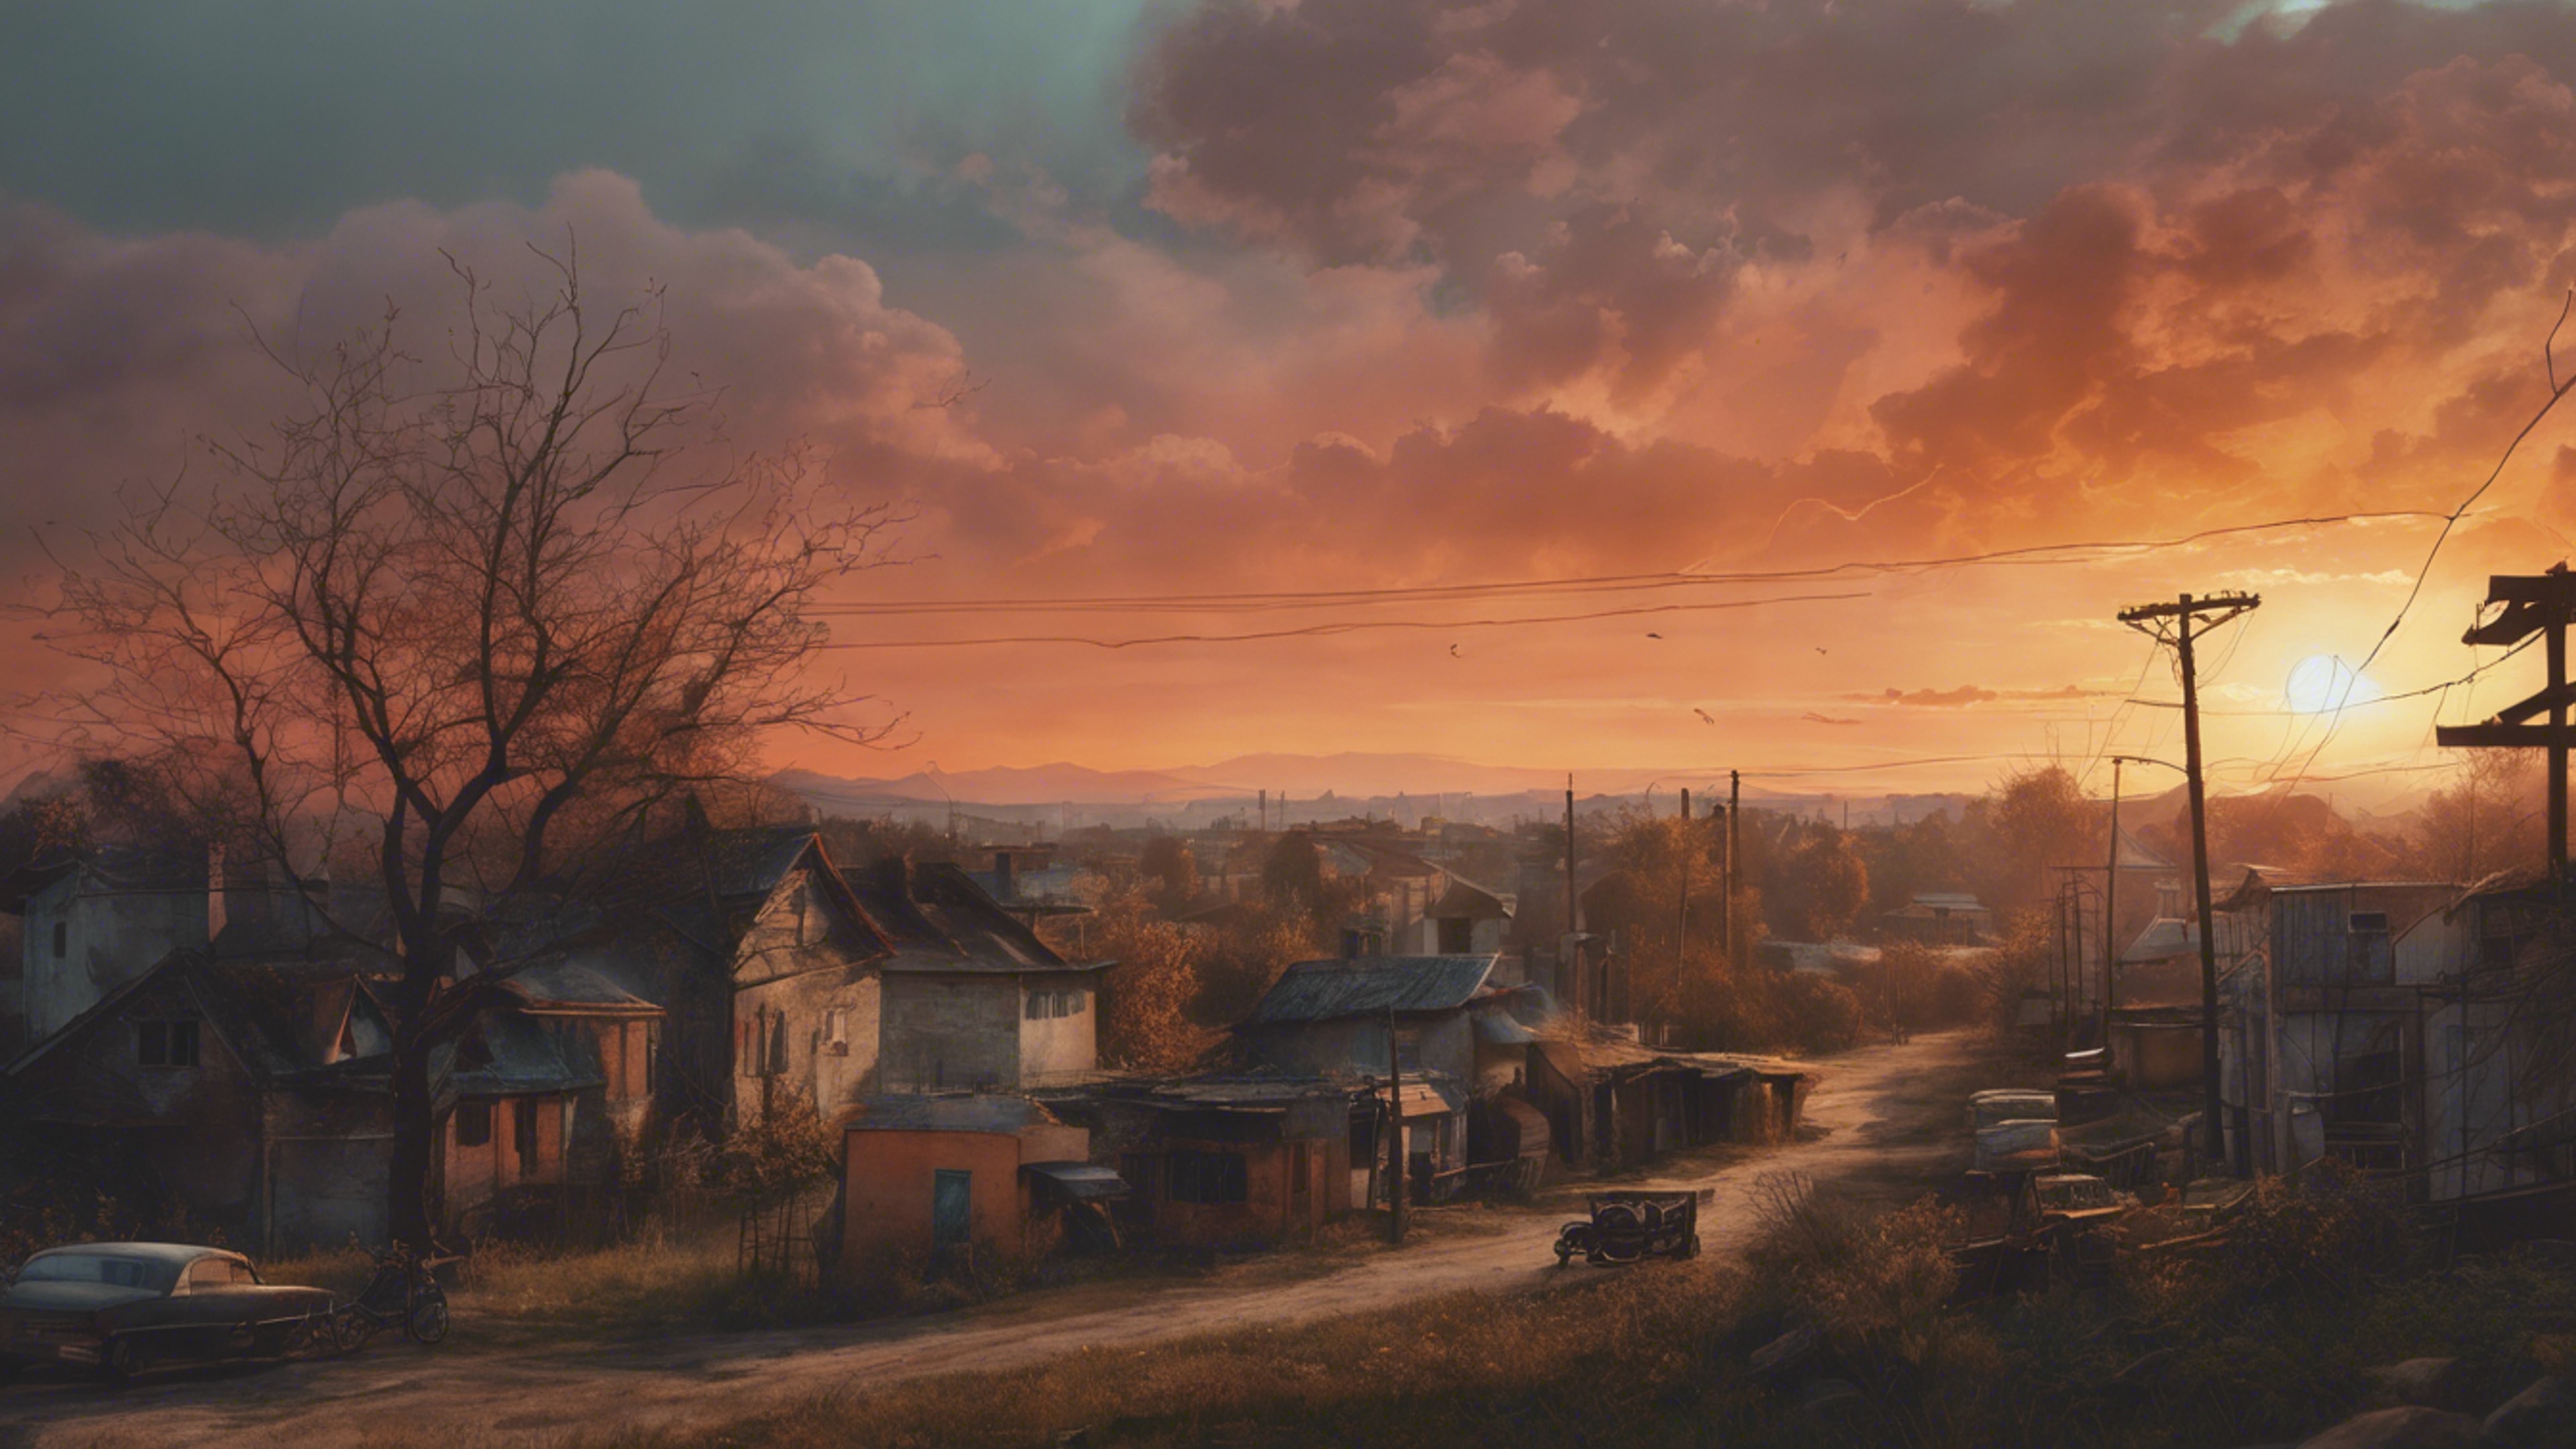 An evocative painting of a nostalgic sunset over a forgotten hometown. Tapet[c4b7fcd1dd4d40f1b7ab]